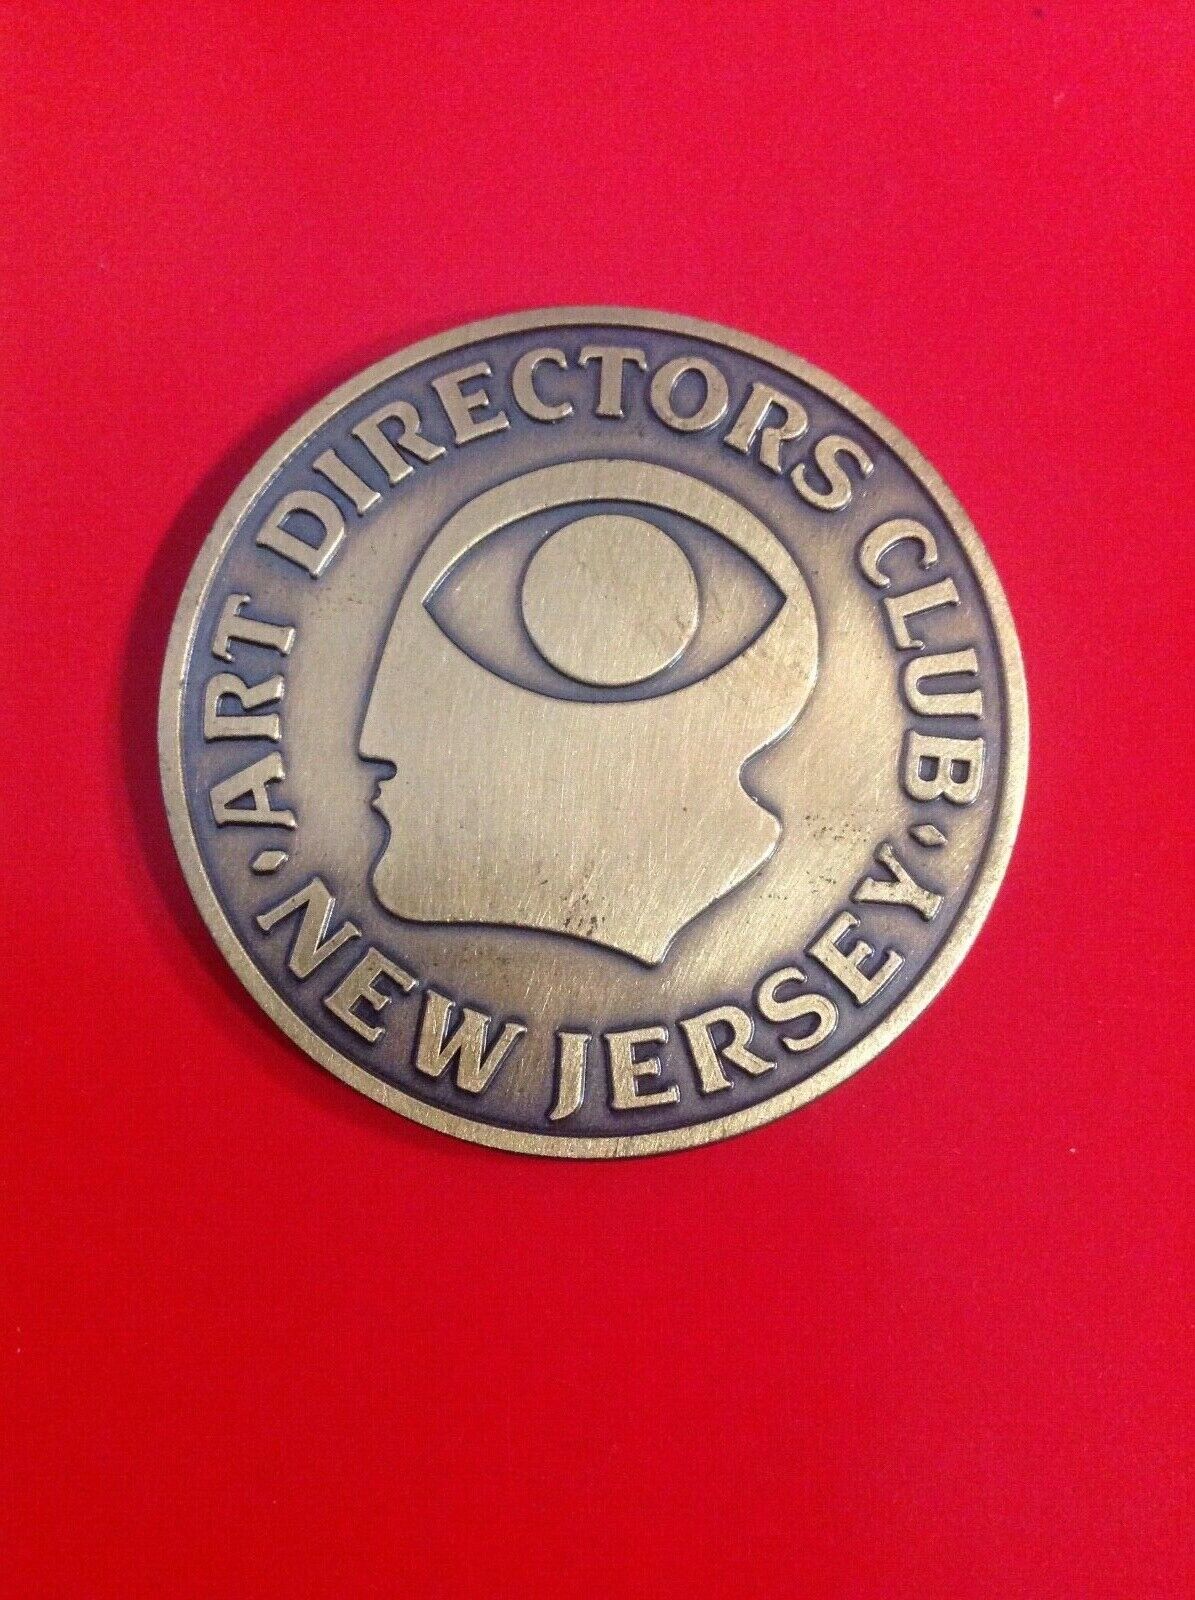 Primary image for Vintage art  Directors club New Jersey new  medallion